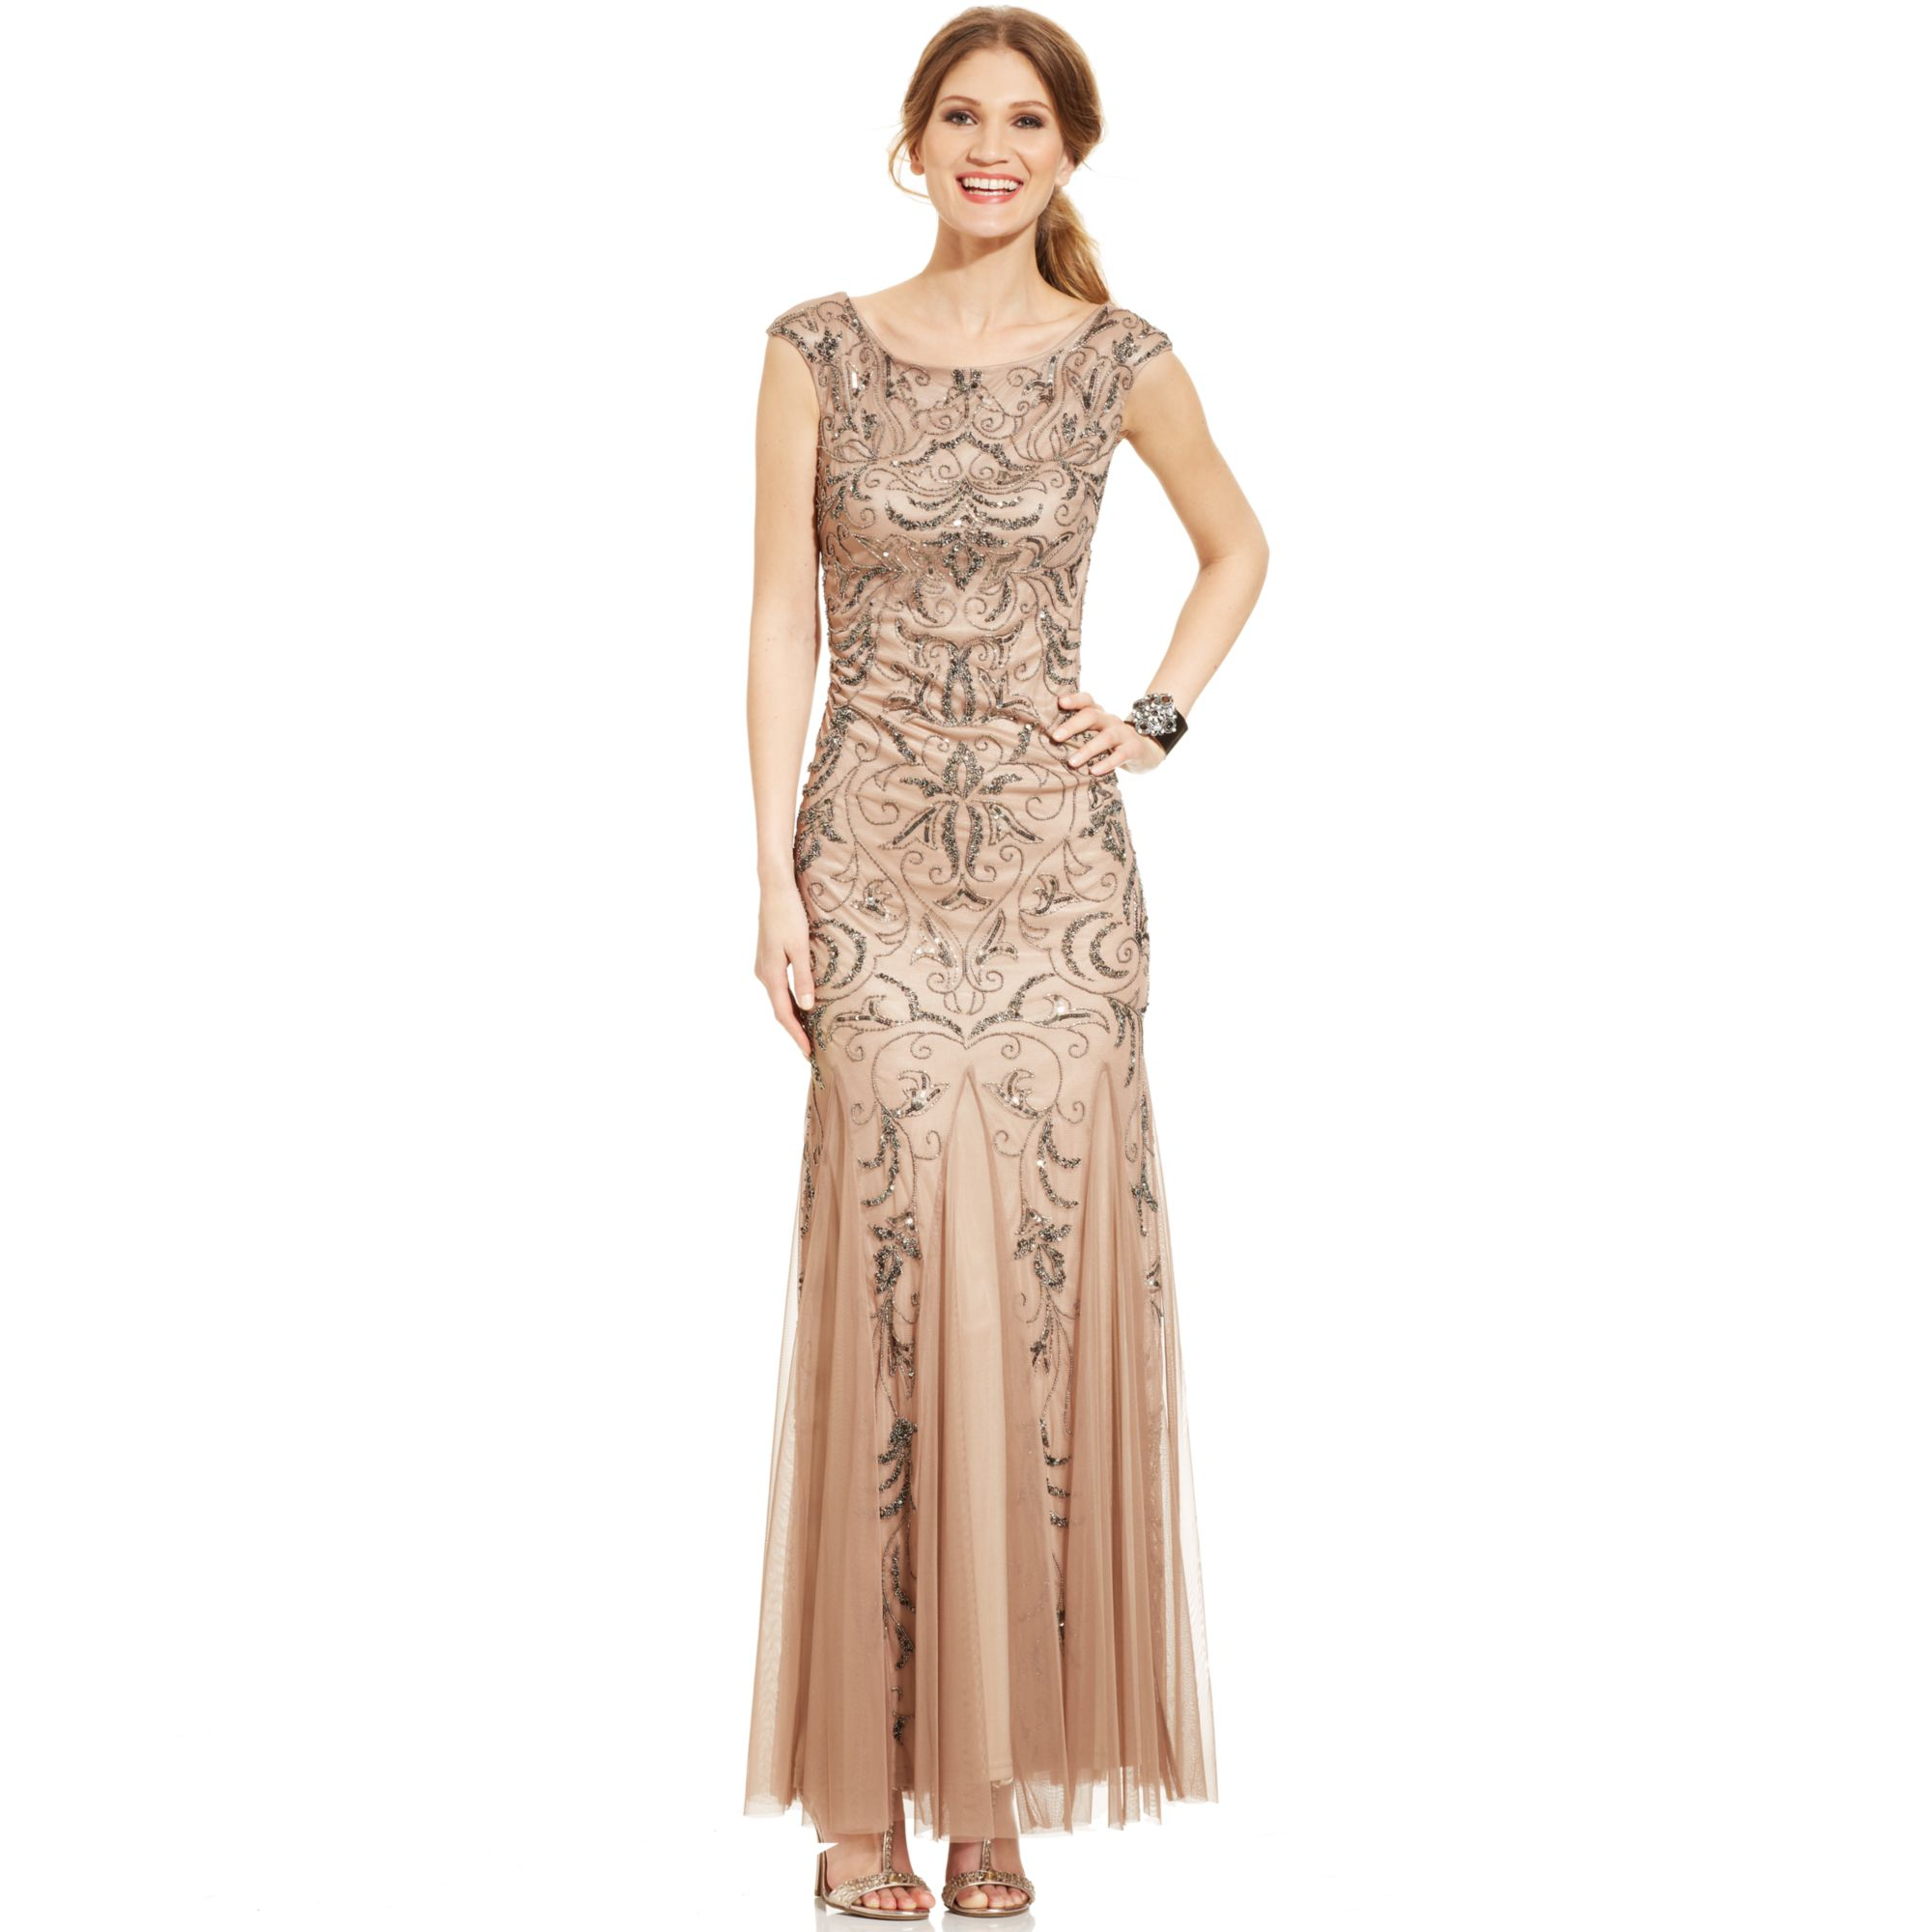 Adrianna Papell Capsleeve Beaded Mermaid Gown in Nude (Natural) - Lyst